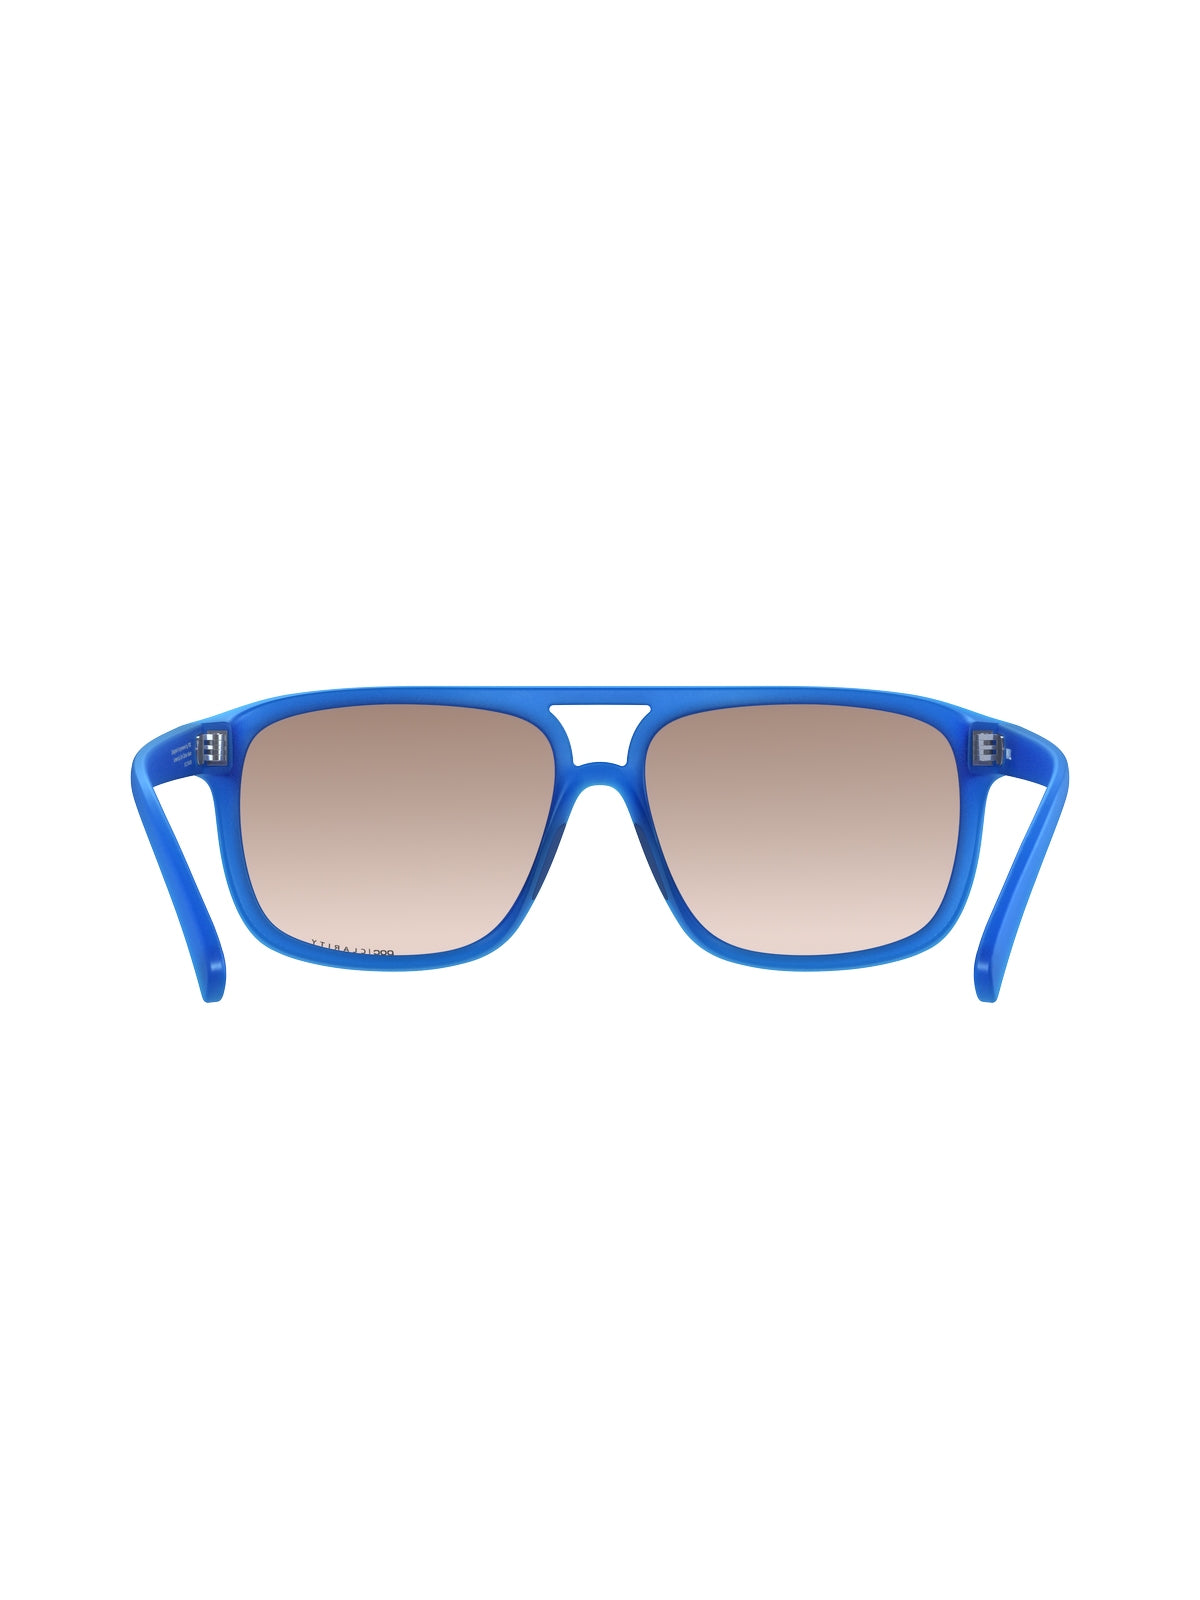 Okulary POC WILL - Opal Blue Translucent - Clarity Trail | Brown/Silver Mirror Cat 2